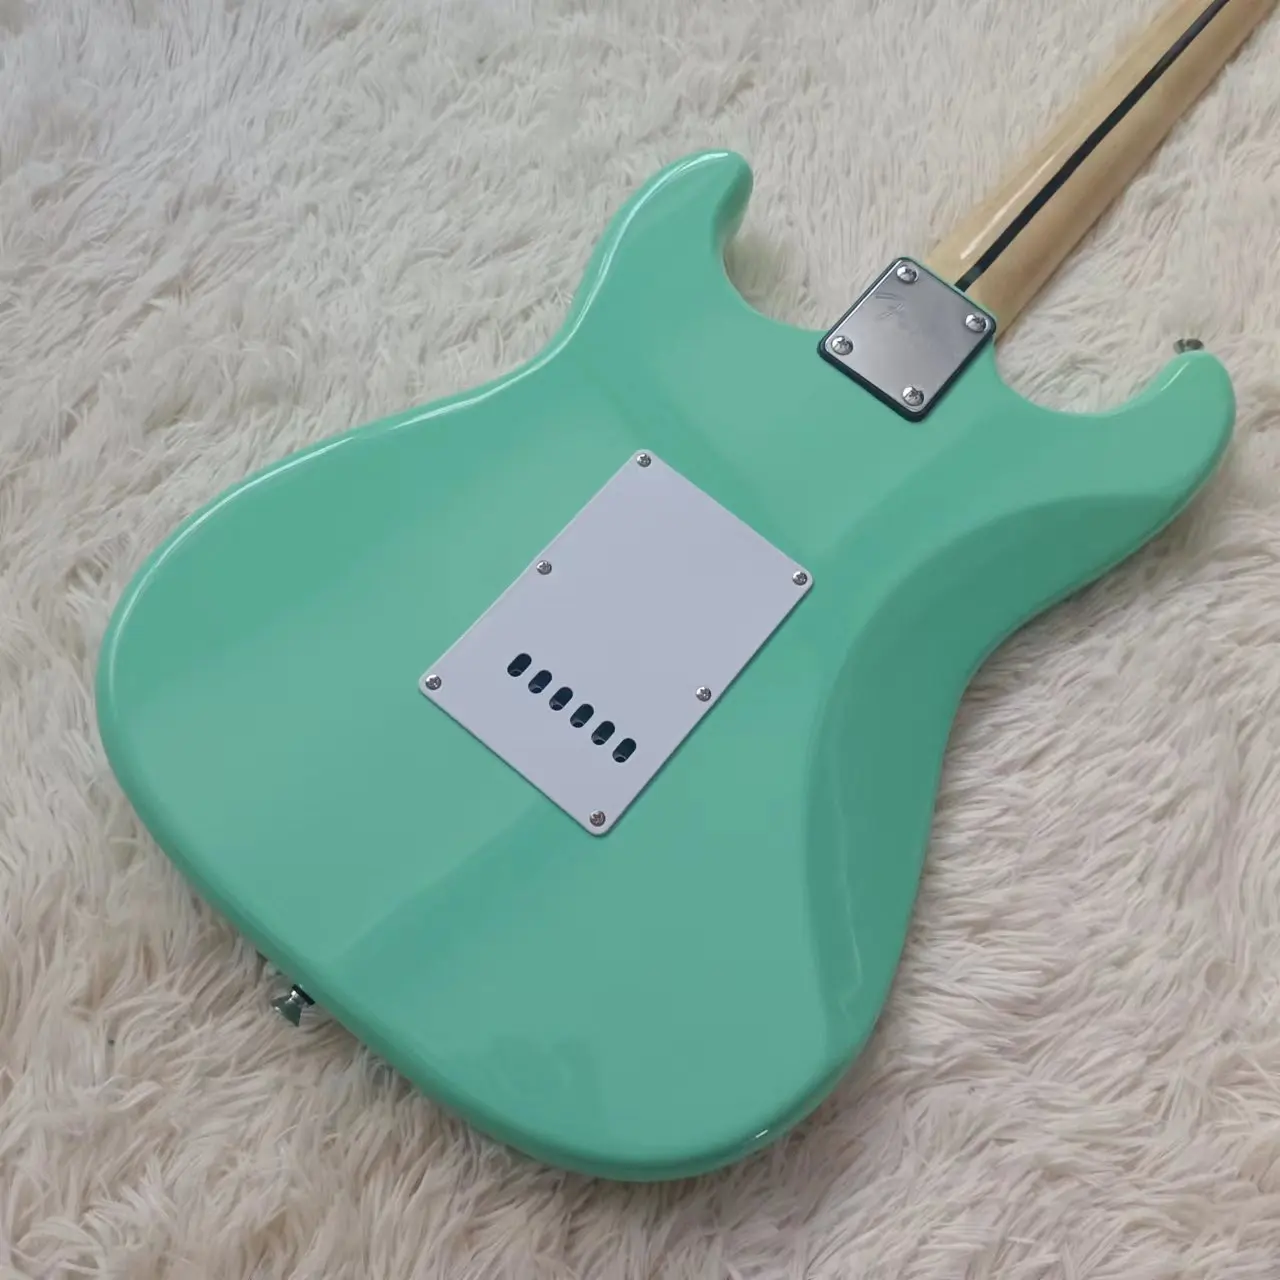 Cables High quality custom body 6 string maple fretboard electric guitar 22 Fret special price surf green